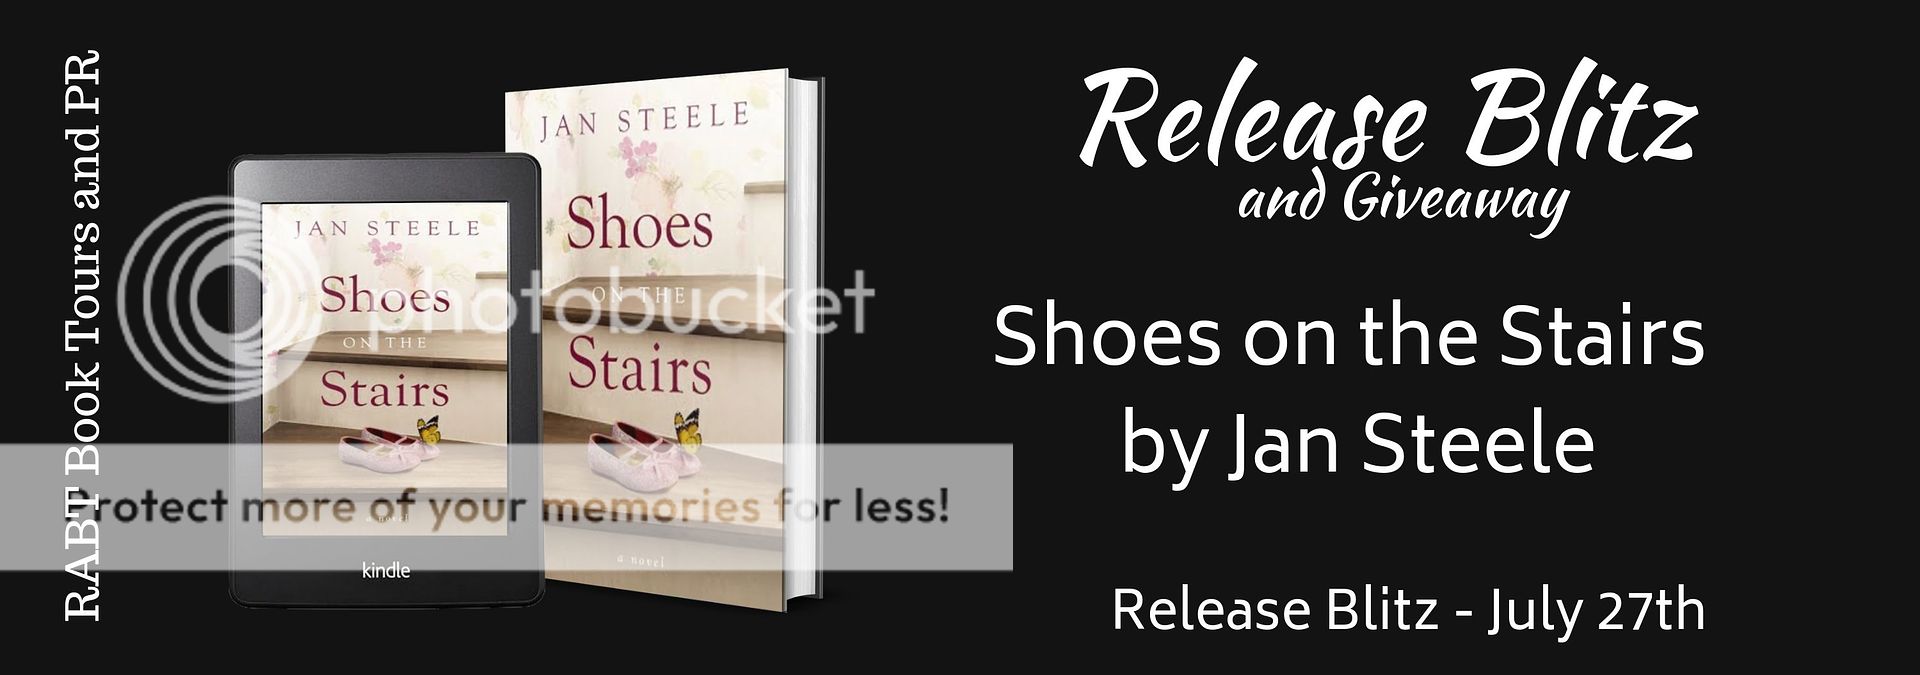 Release Blitz: Shoes on the Stairs by Jan Steele #womensfiction #newrelease #giveaway @jbaby711 @RABTBookTours